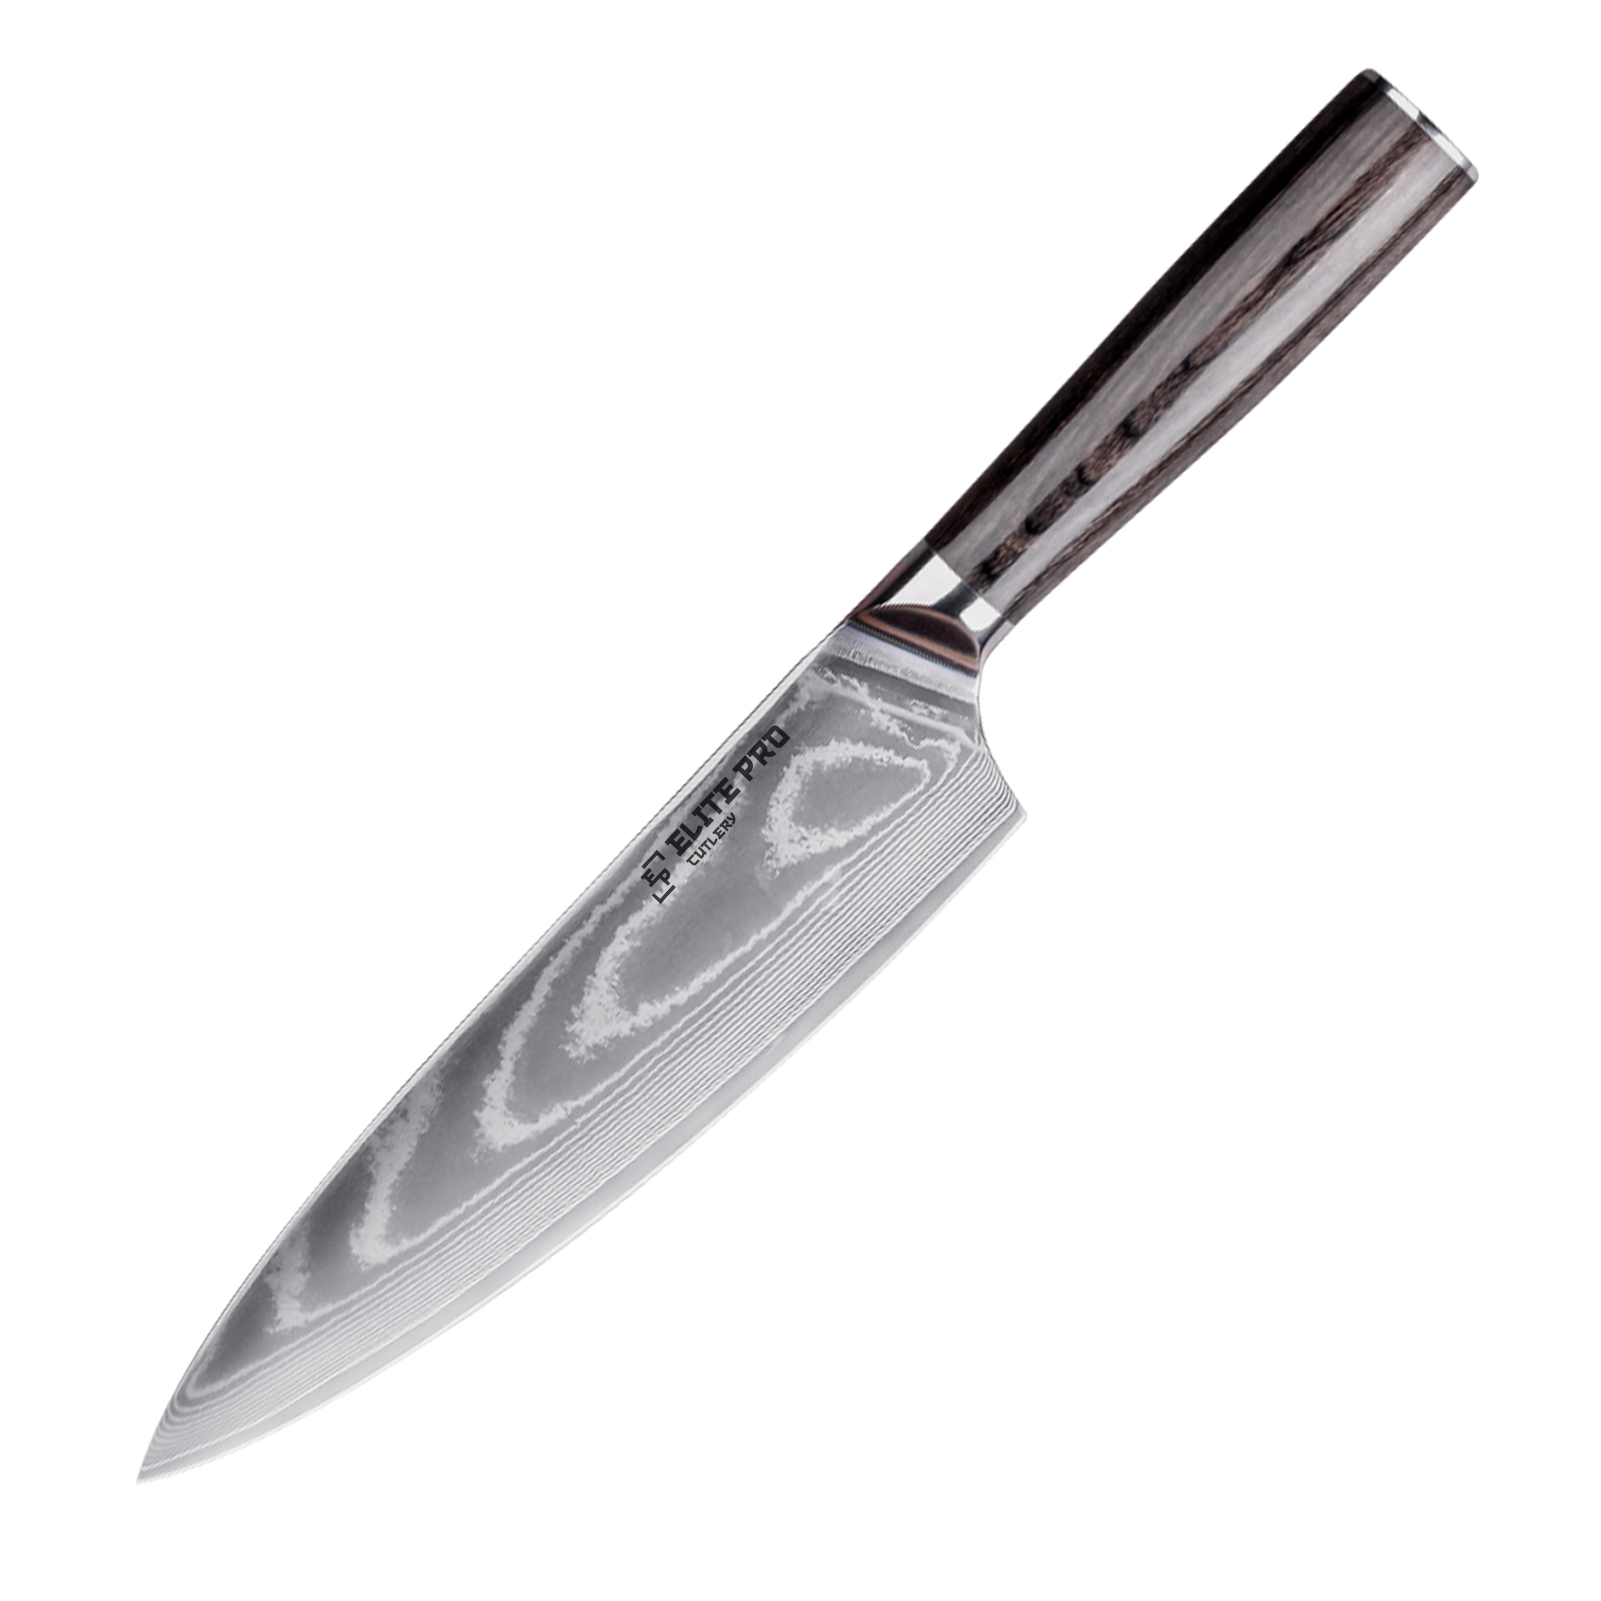 Elite Pro Cutlery Professional Kitchen Knives made with Black Pakka Wood Handle